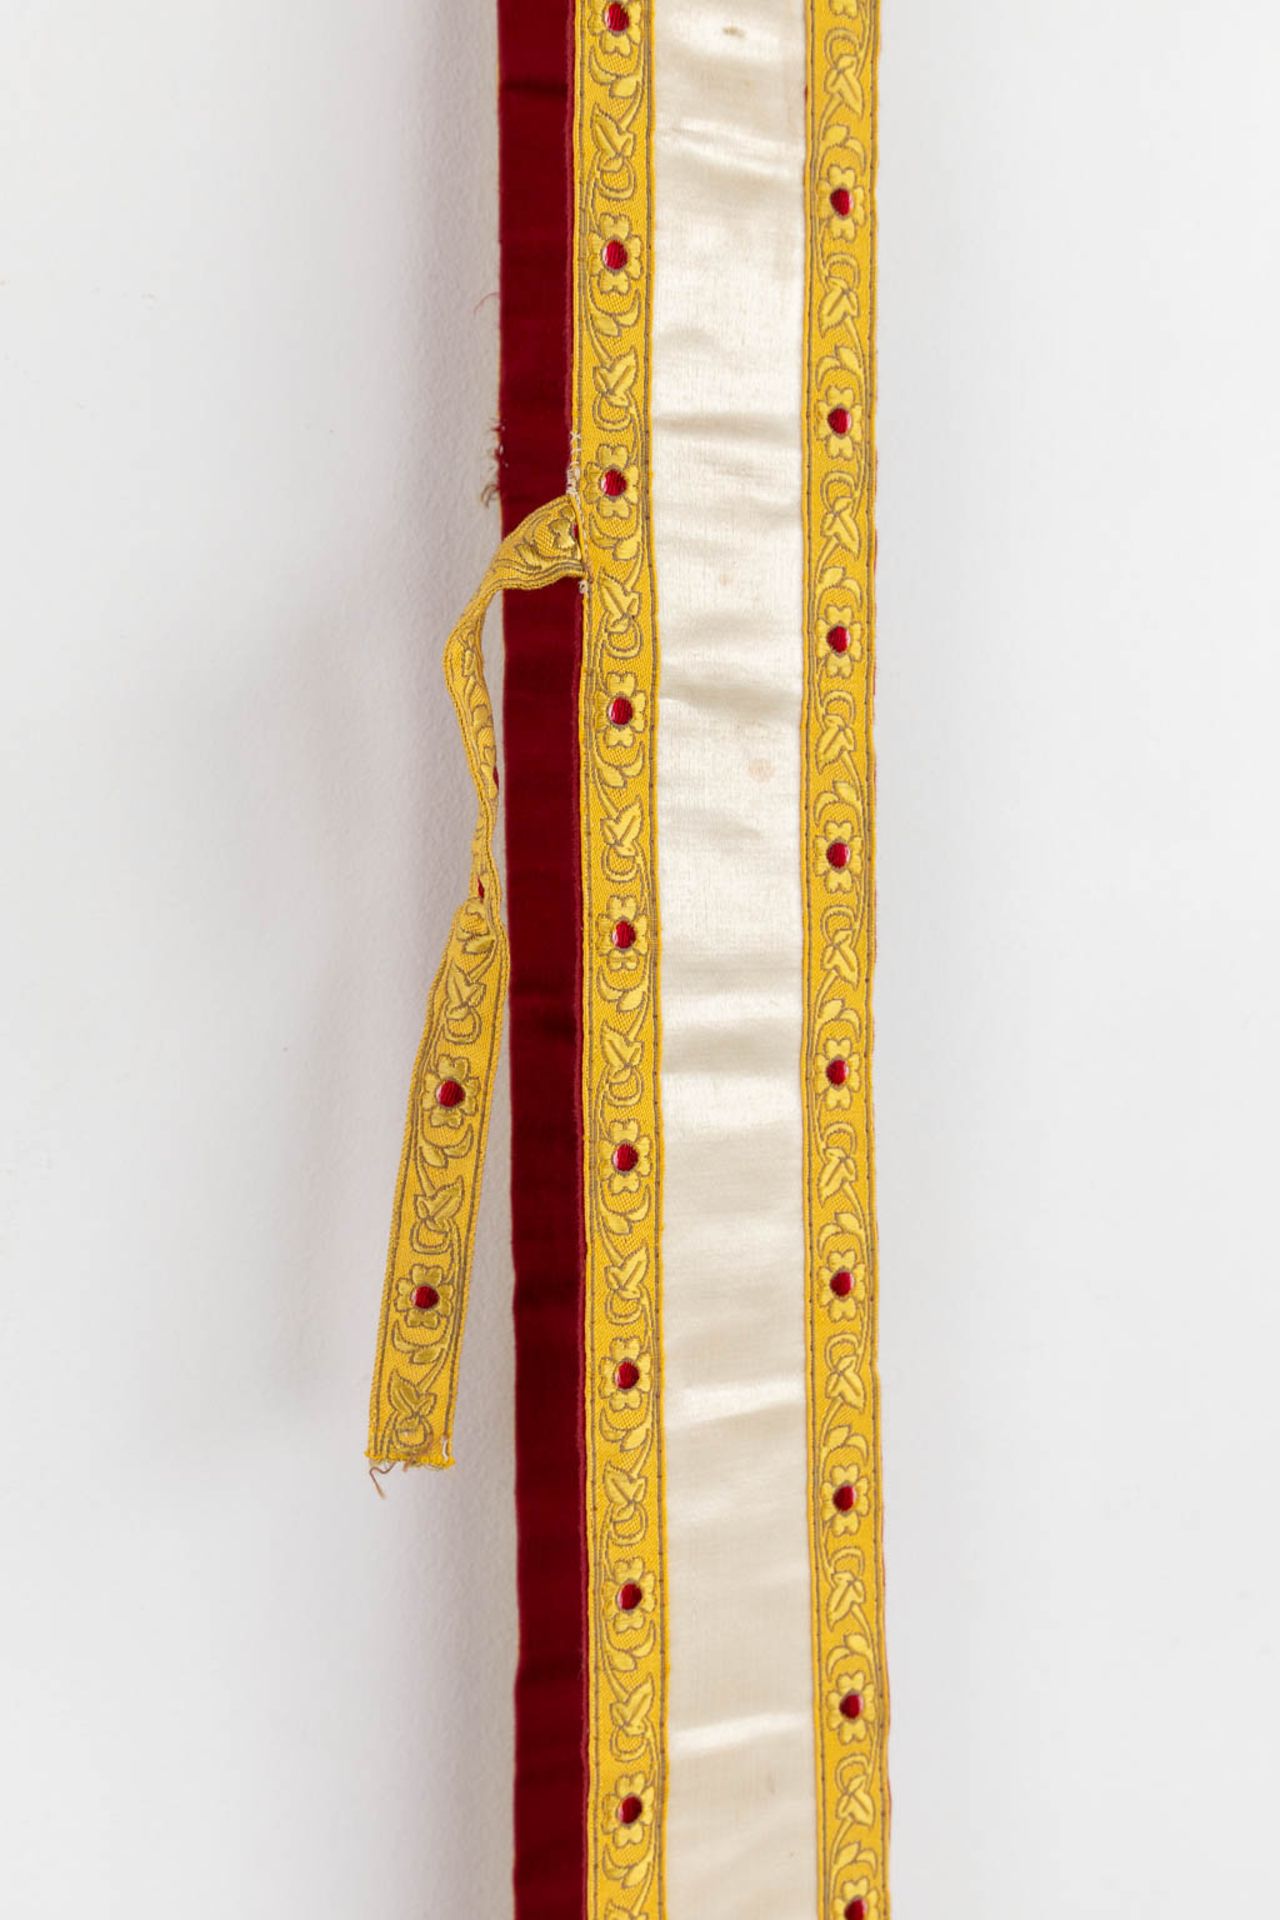 Four Dalmatics, Two Roman Chasubles, A stola and Chalice Veil, finished with embroideries. - Image 59 of 59